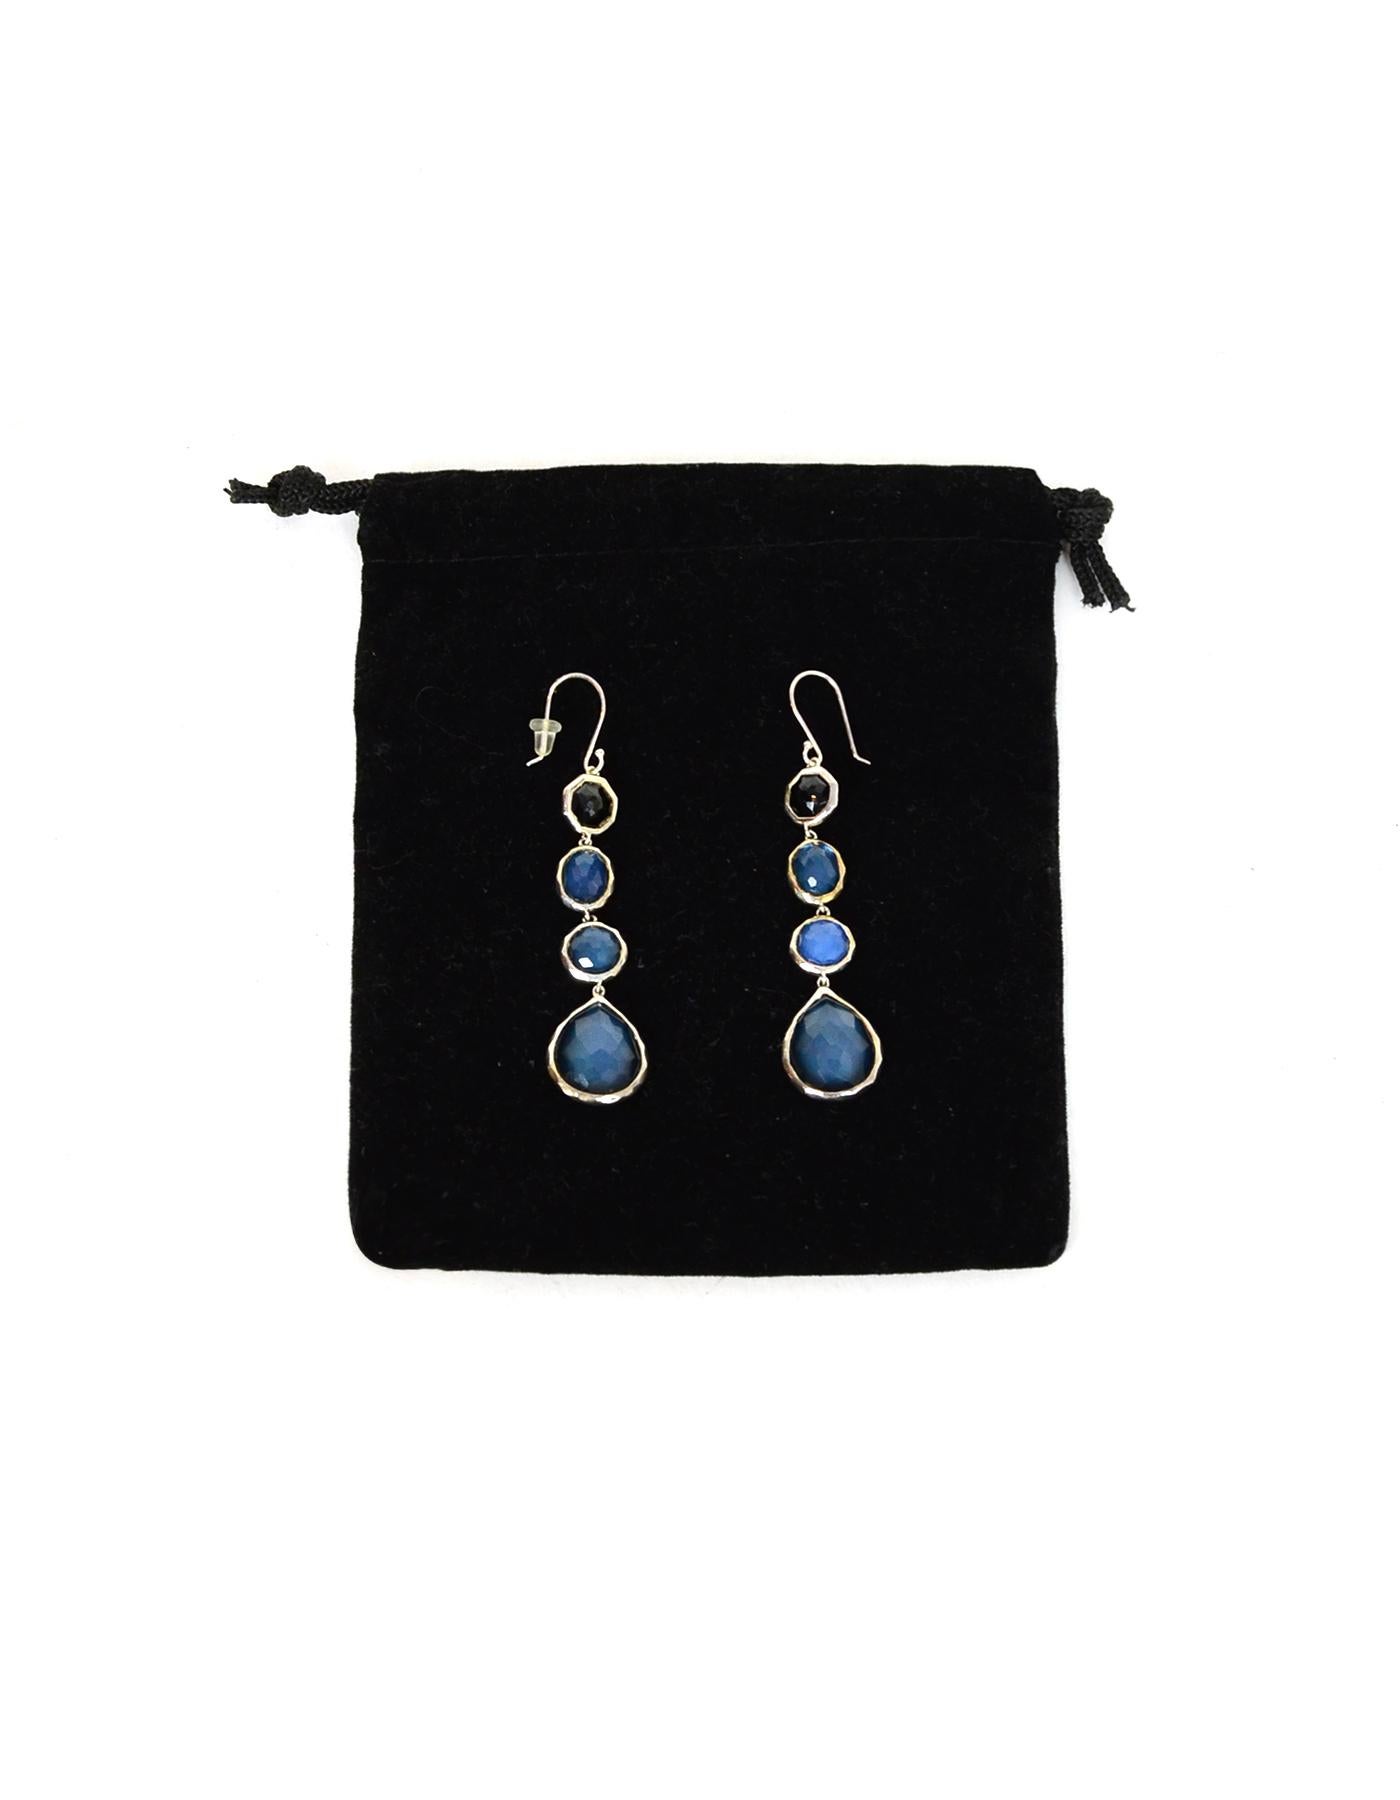 Ippolita Silver Onyx and Blue Mother of Pearl Hanging Drop Earrings 1